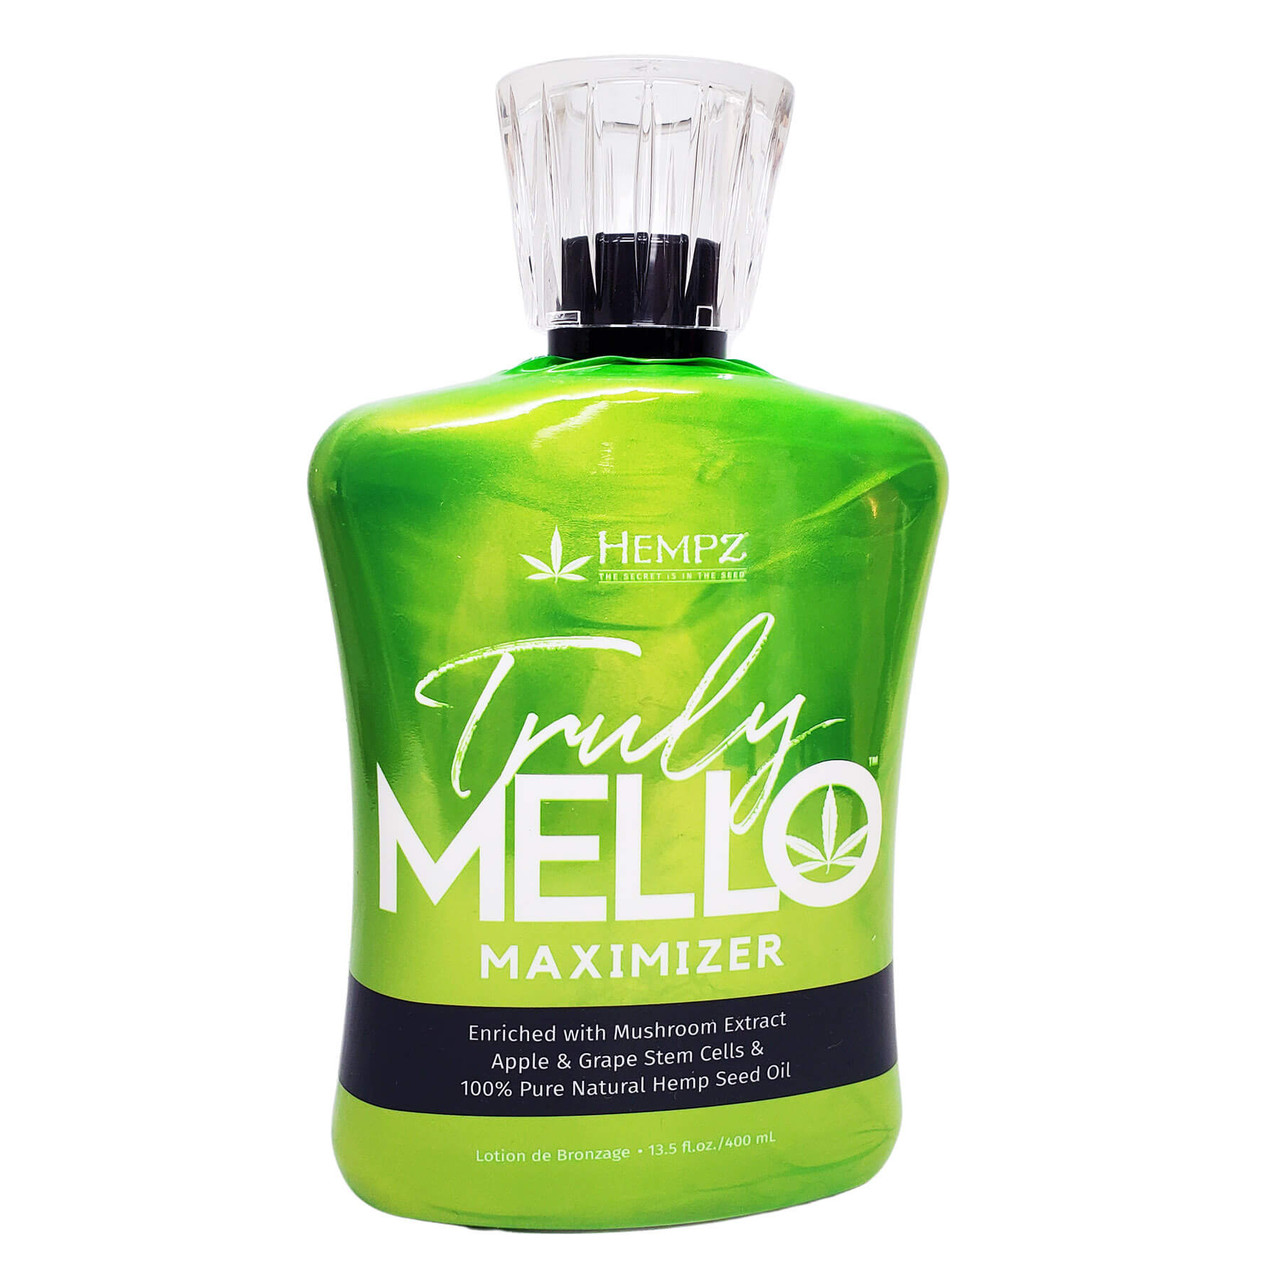 Hempz Truly Mello Maximizer Enriched with Mushroom Extract - 13.5 oz.